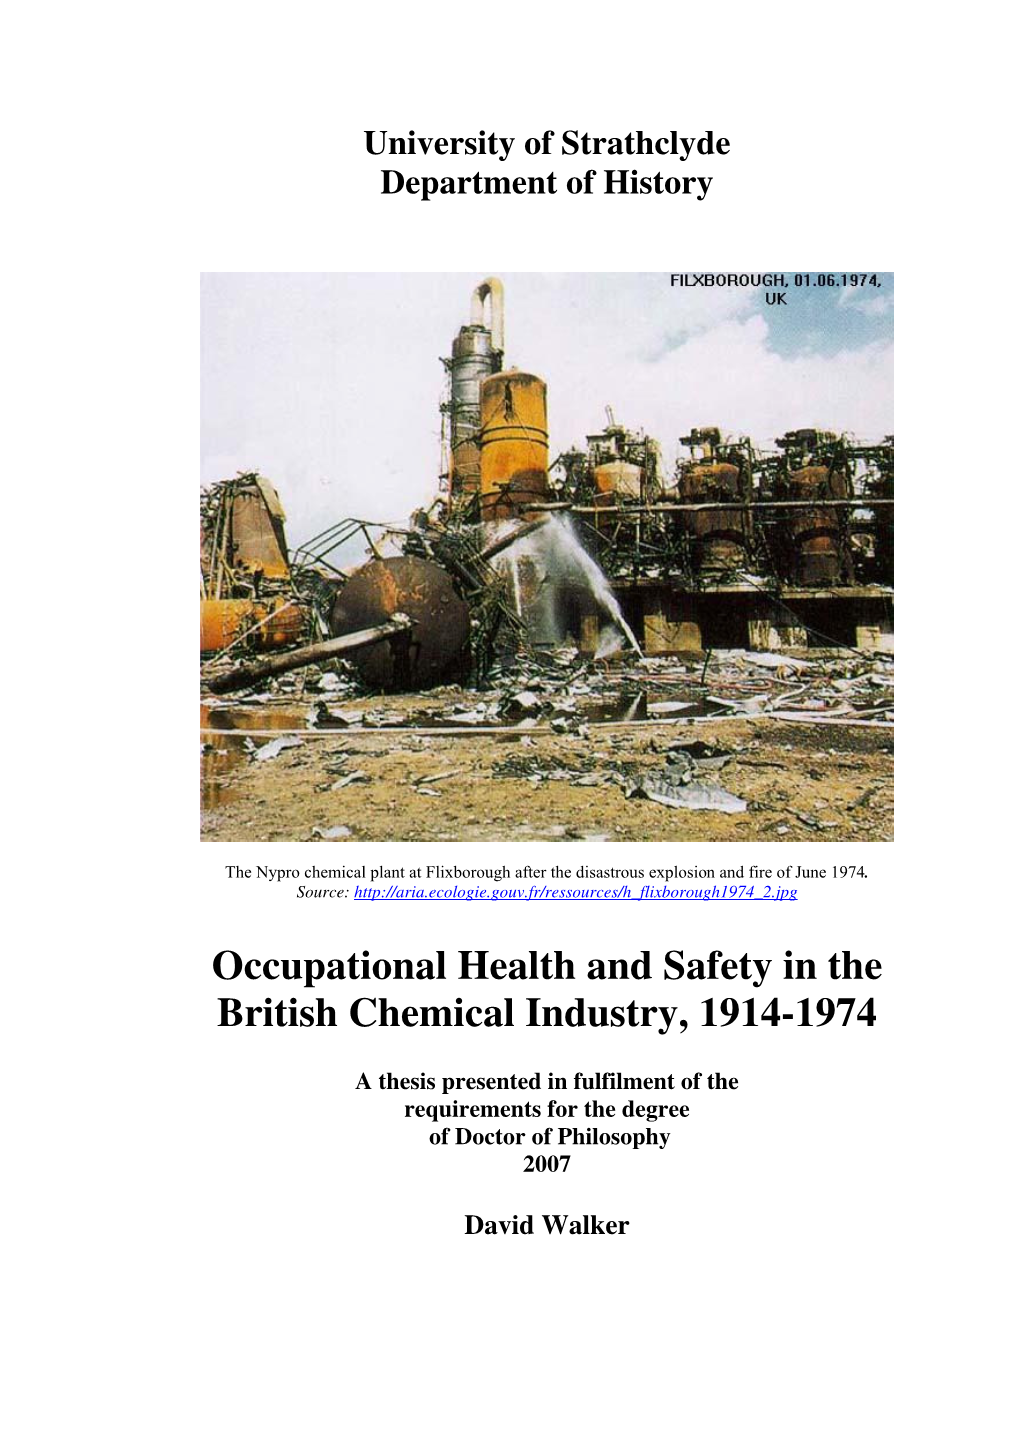 Occupational Health and Safety in the British Chemical Industry, 1914-1974